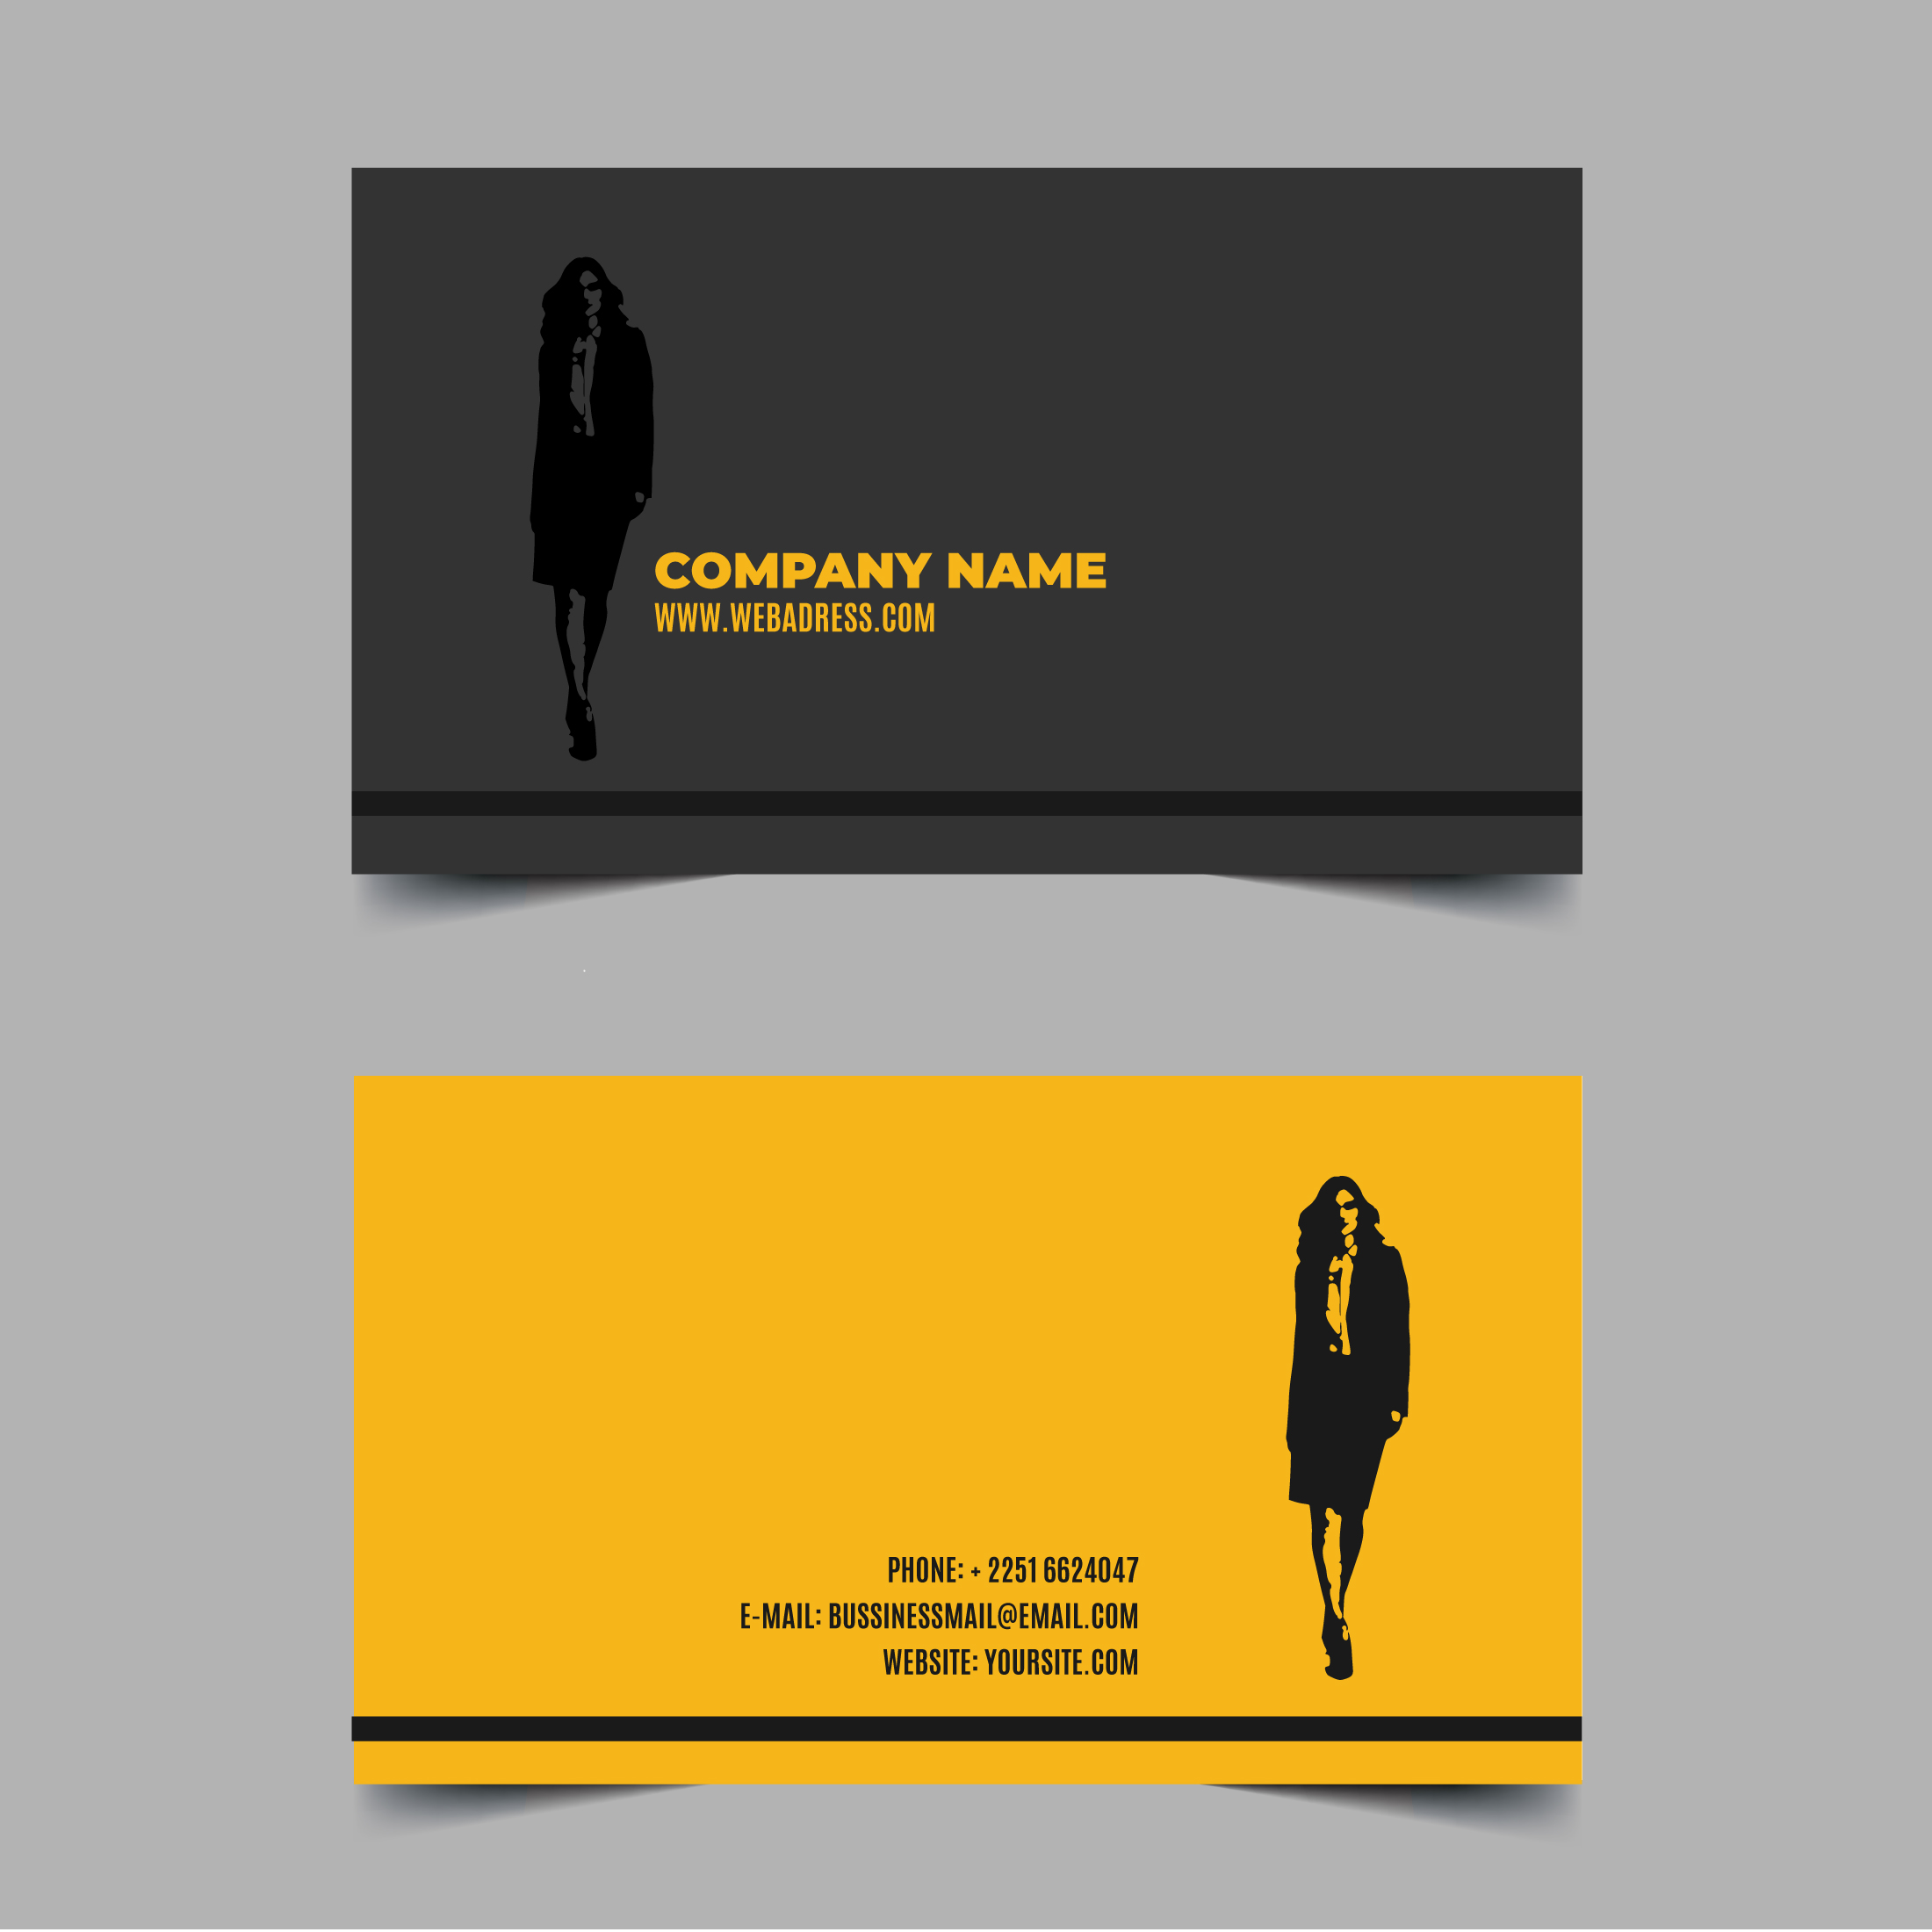 Download Elegant Minimal Black And Yellow Business Card Template Free Vector Mockup 2049055 Vector Art At Vecteezy